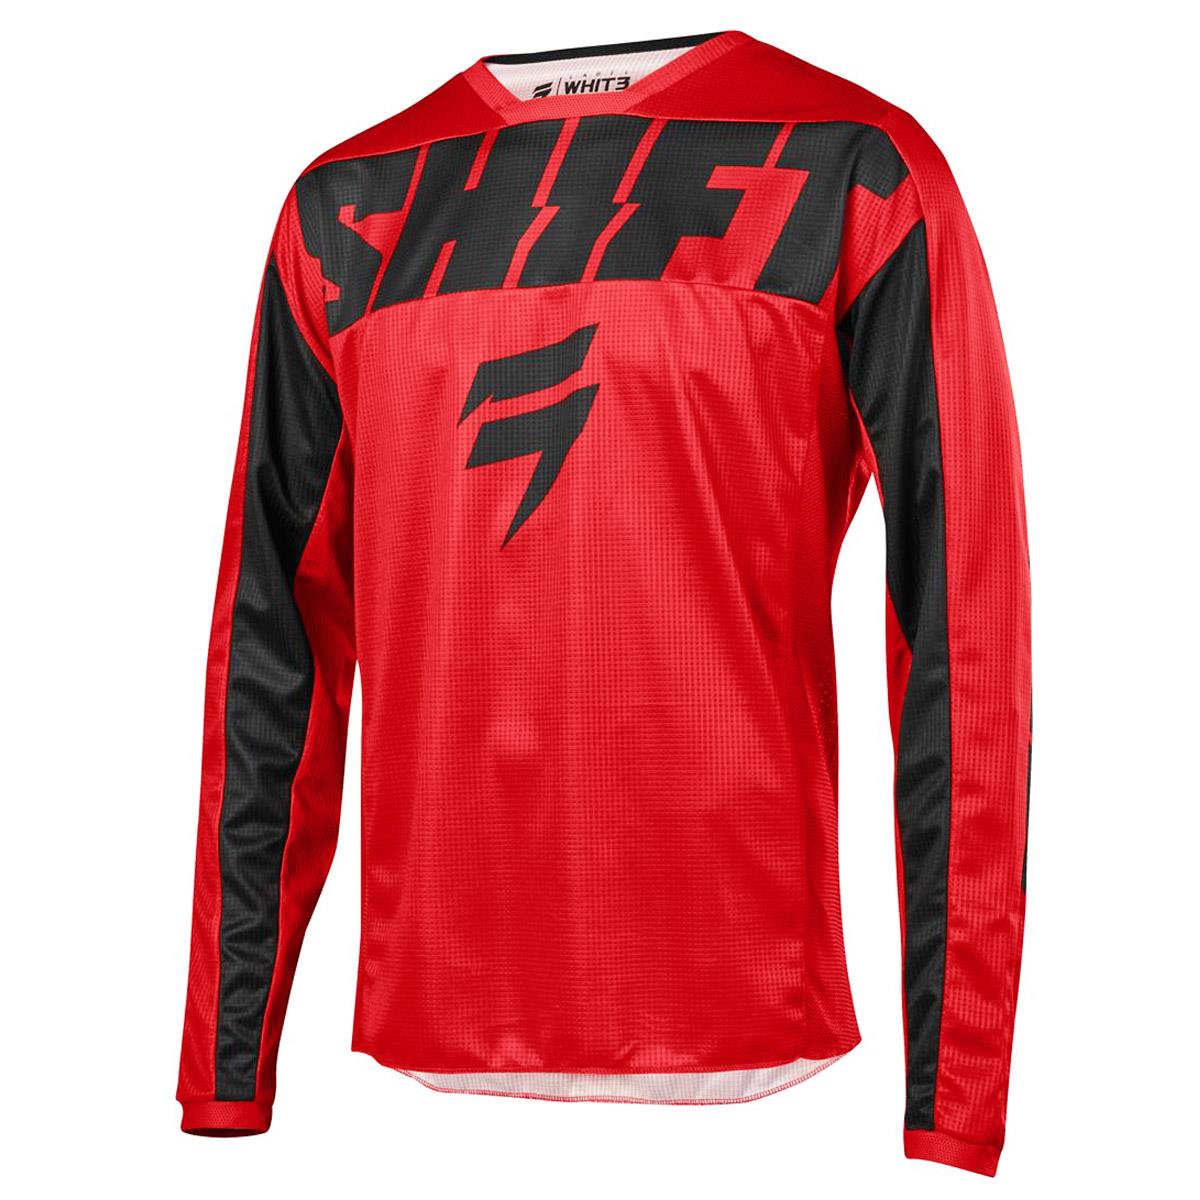 Shift Jersey Whit3 Label York Rot